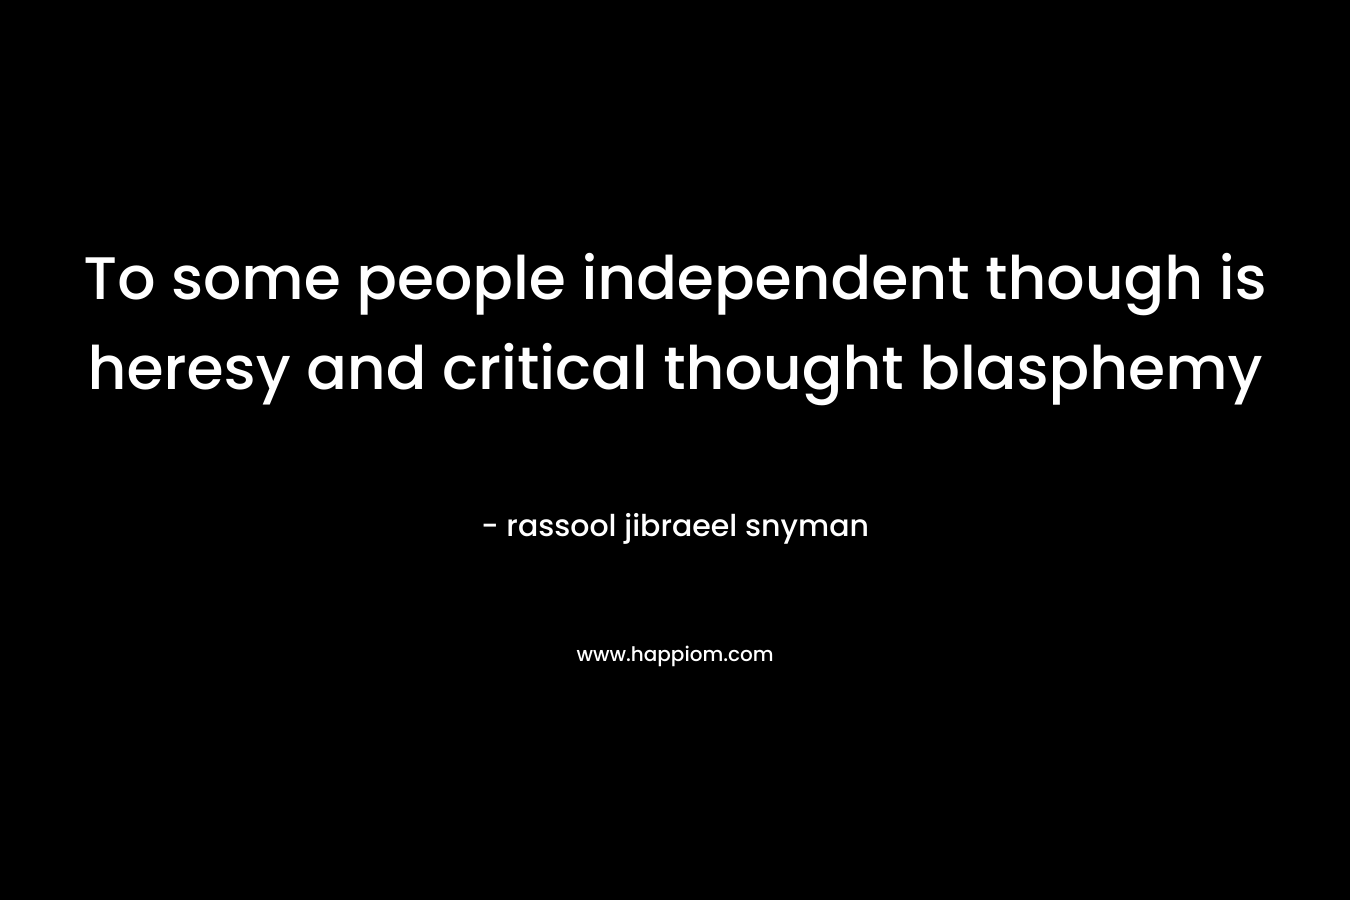 To some people independent though is heresy and critical thought blasphemy